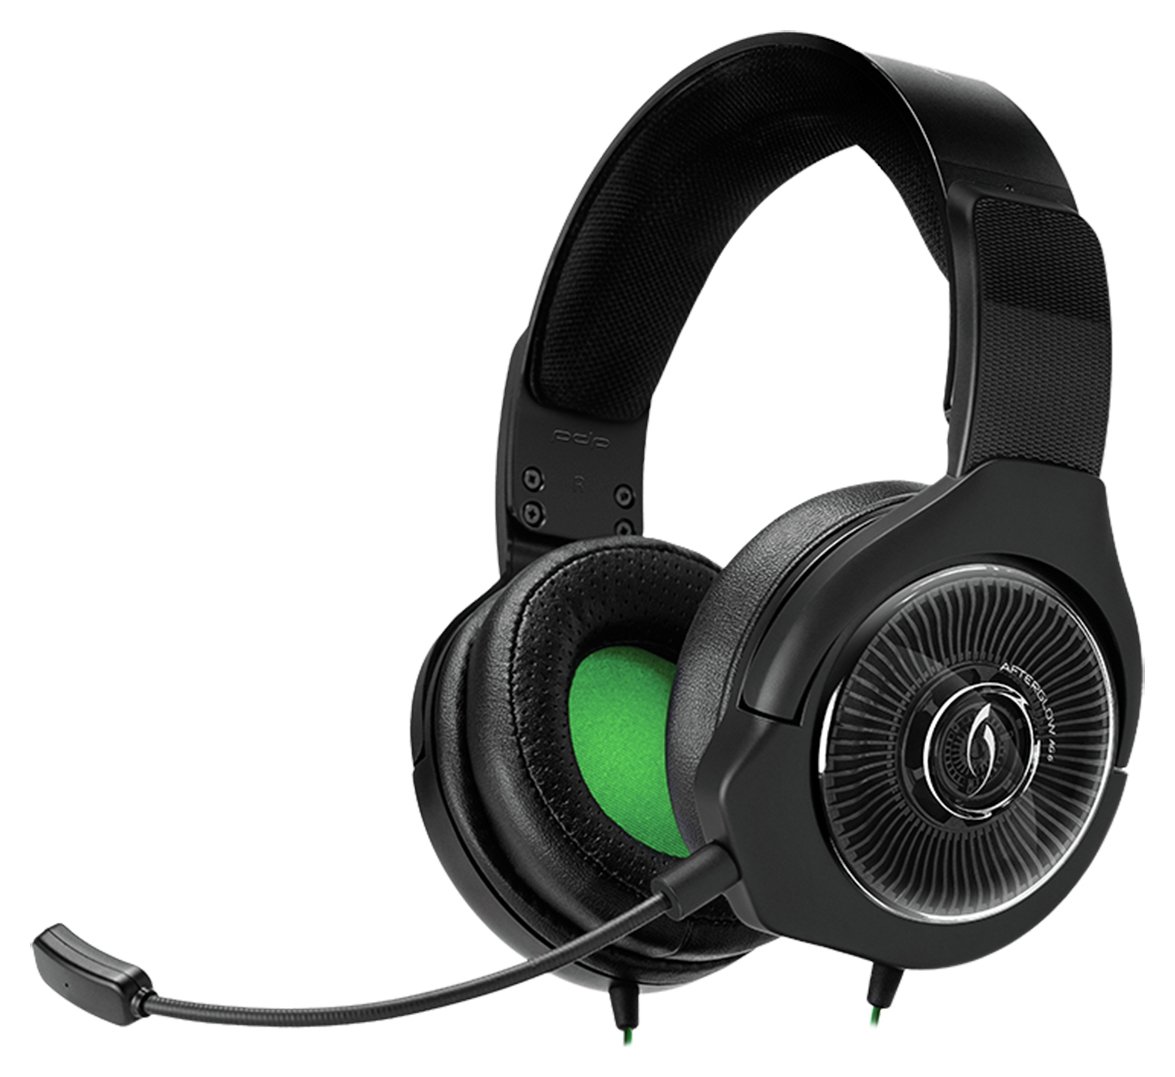 Afterglow AG6 Xbox One & PC Headset - Black